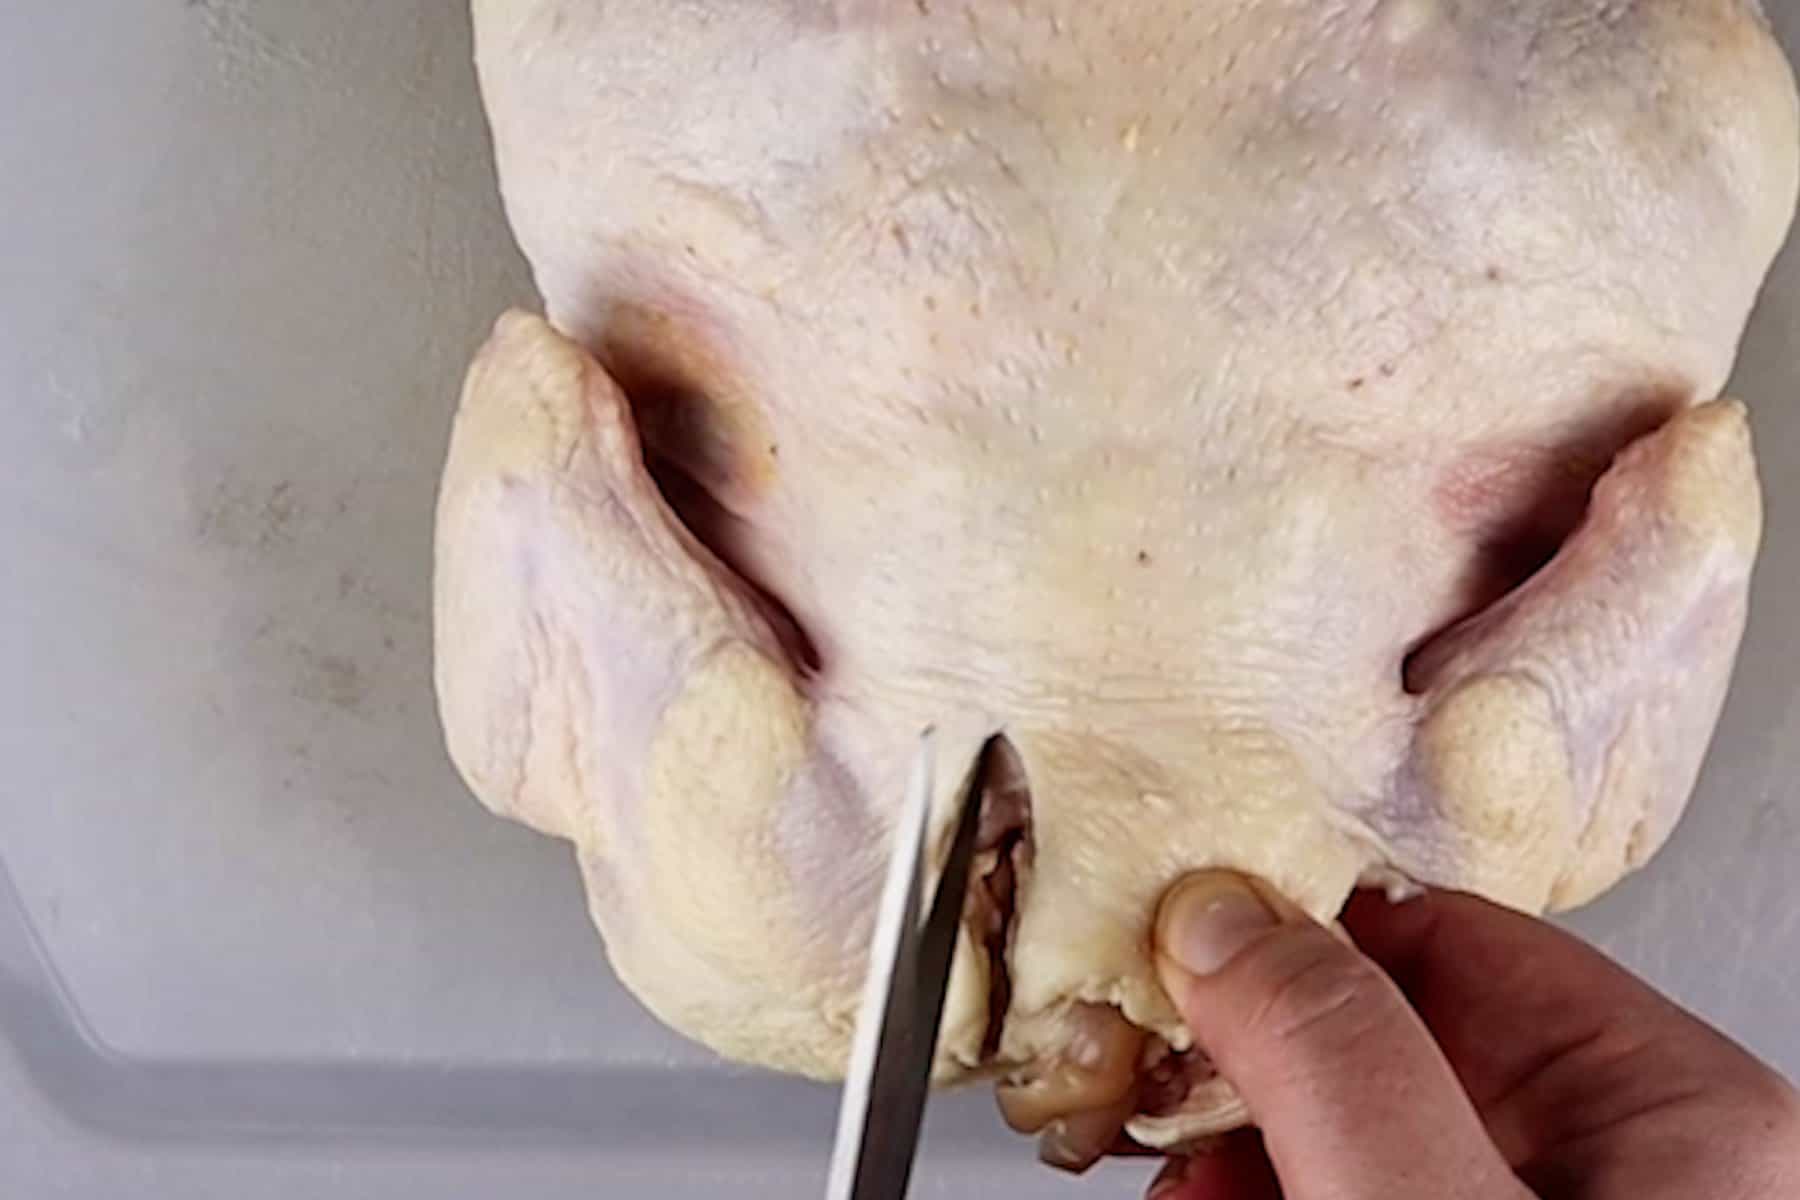 begging to cut along spine at neck of chicken